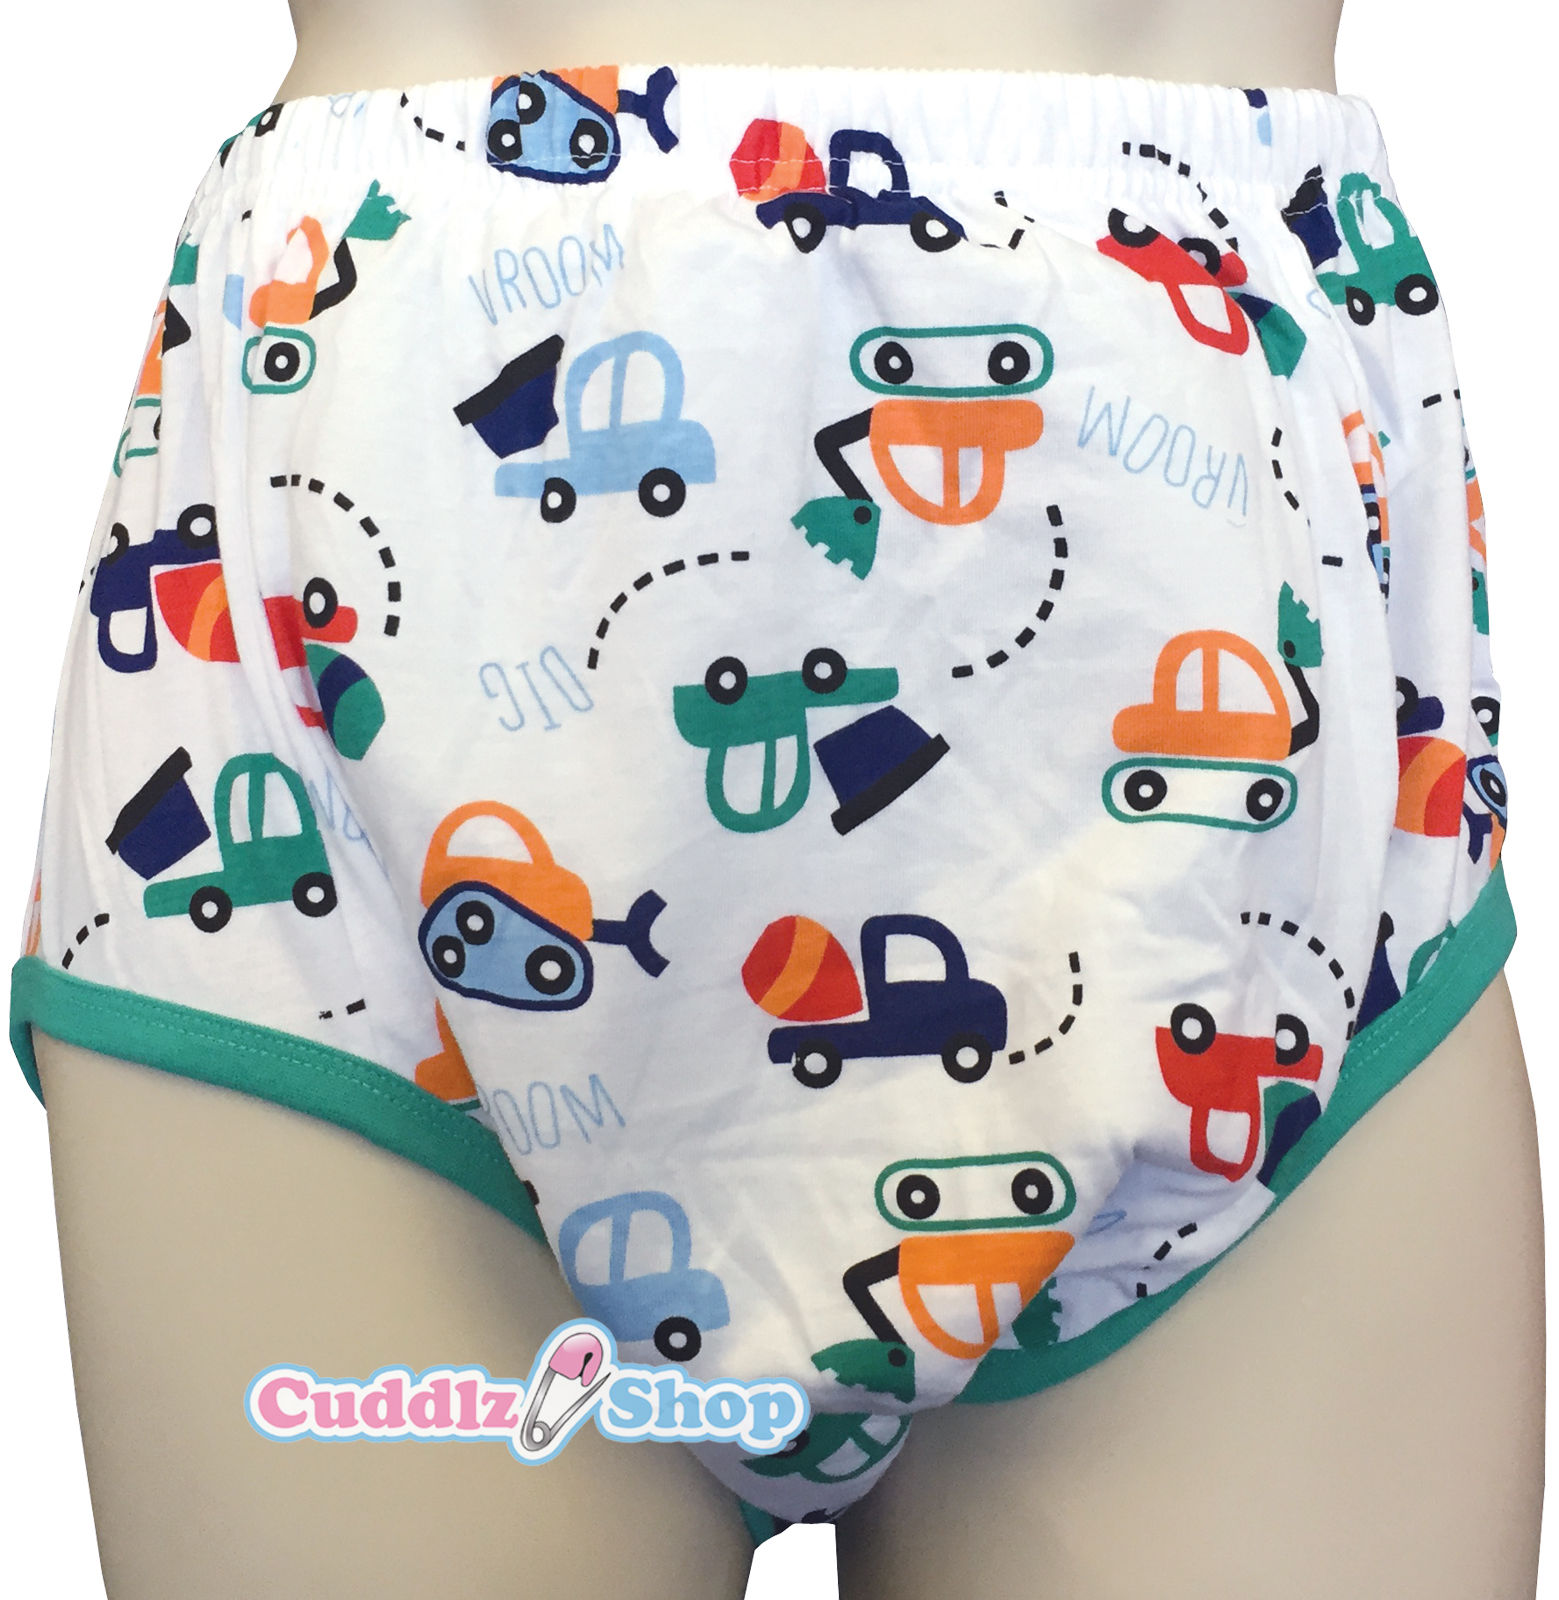 Cuddlz Adult Toy Digger Design Padded Pull Up Cotton Pants ABDL